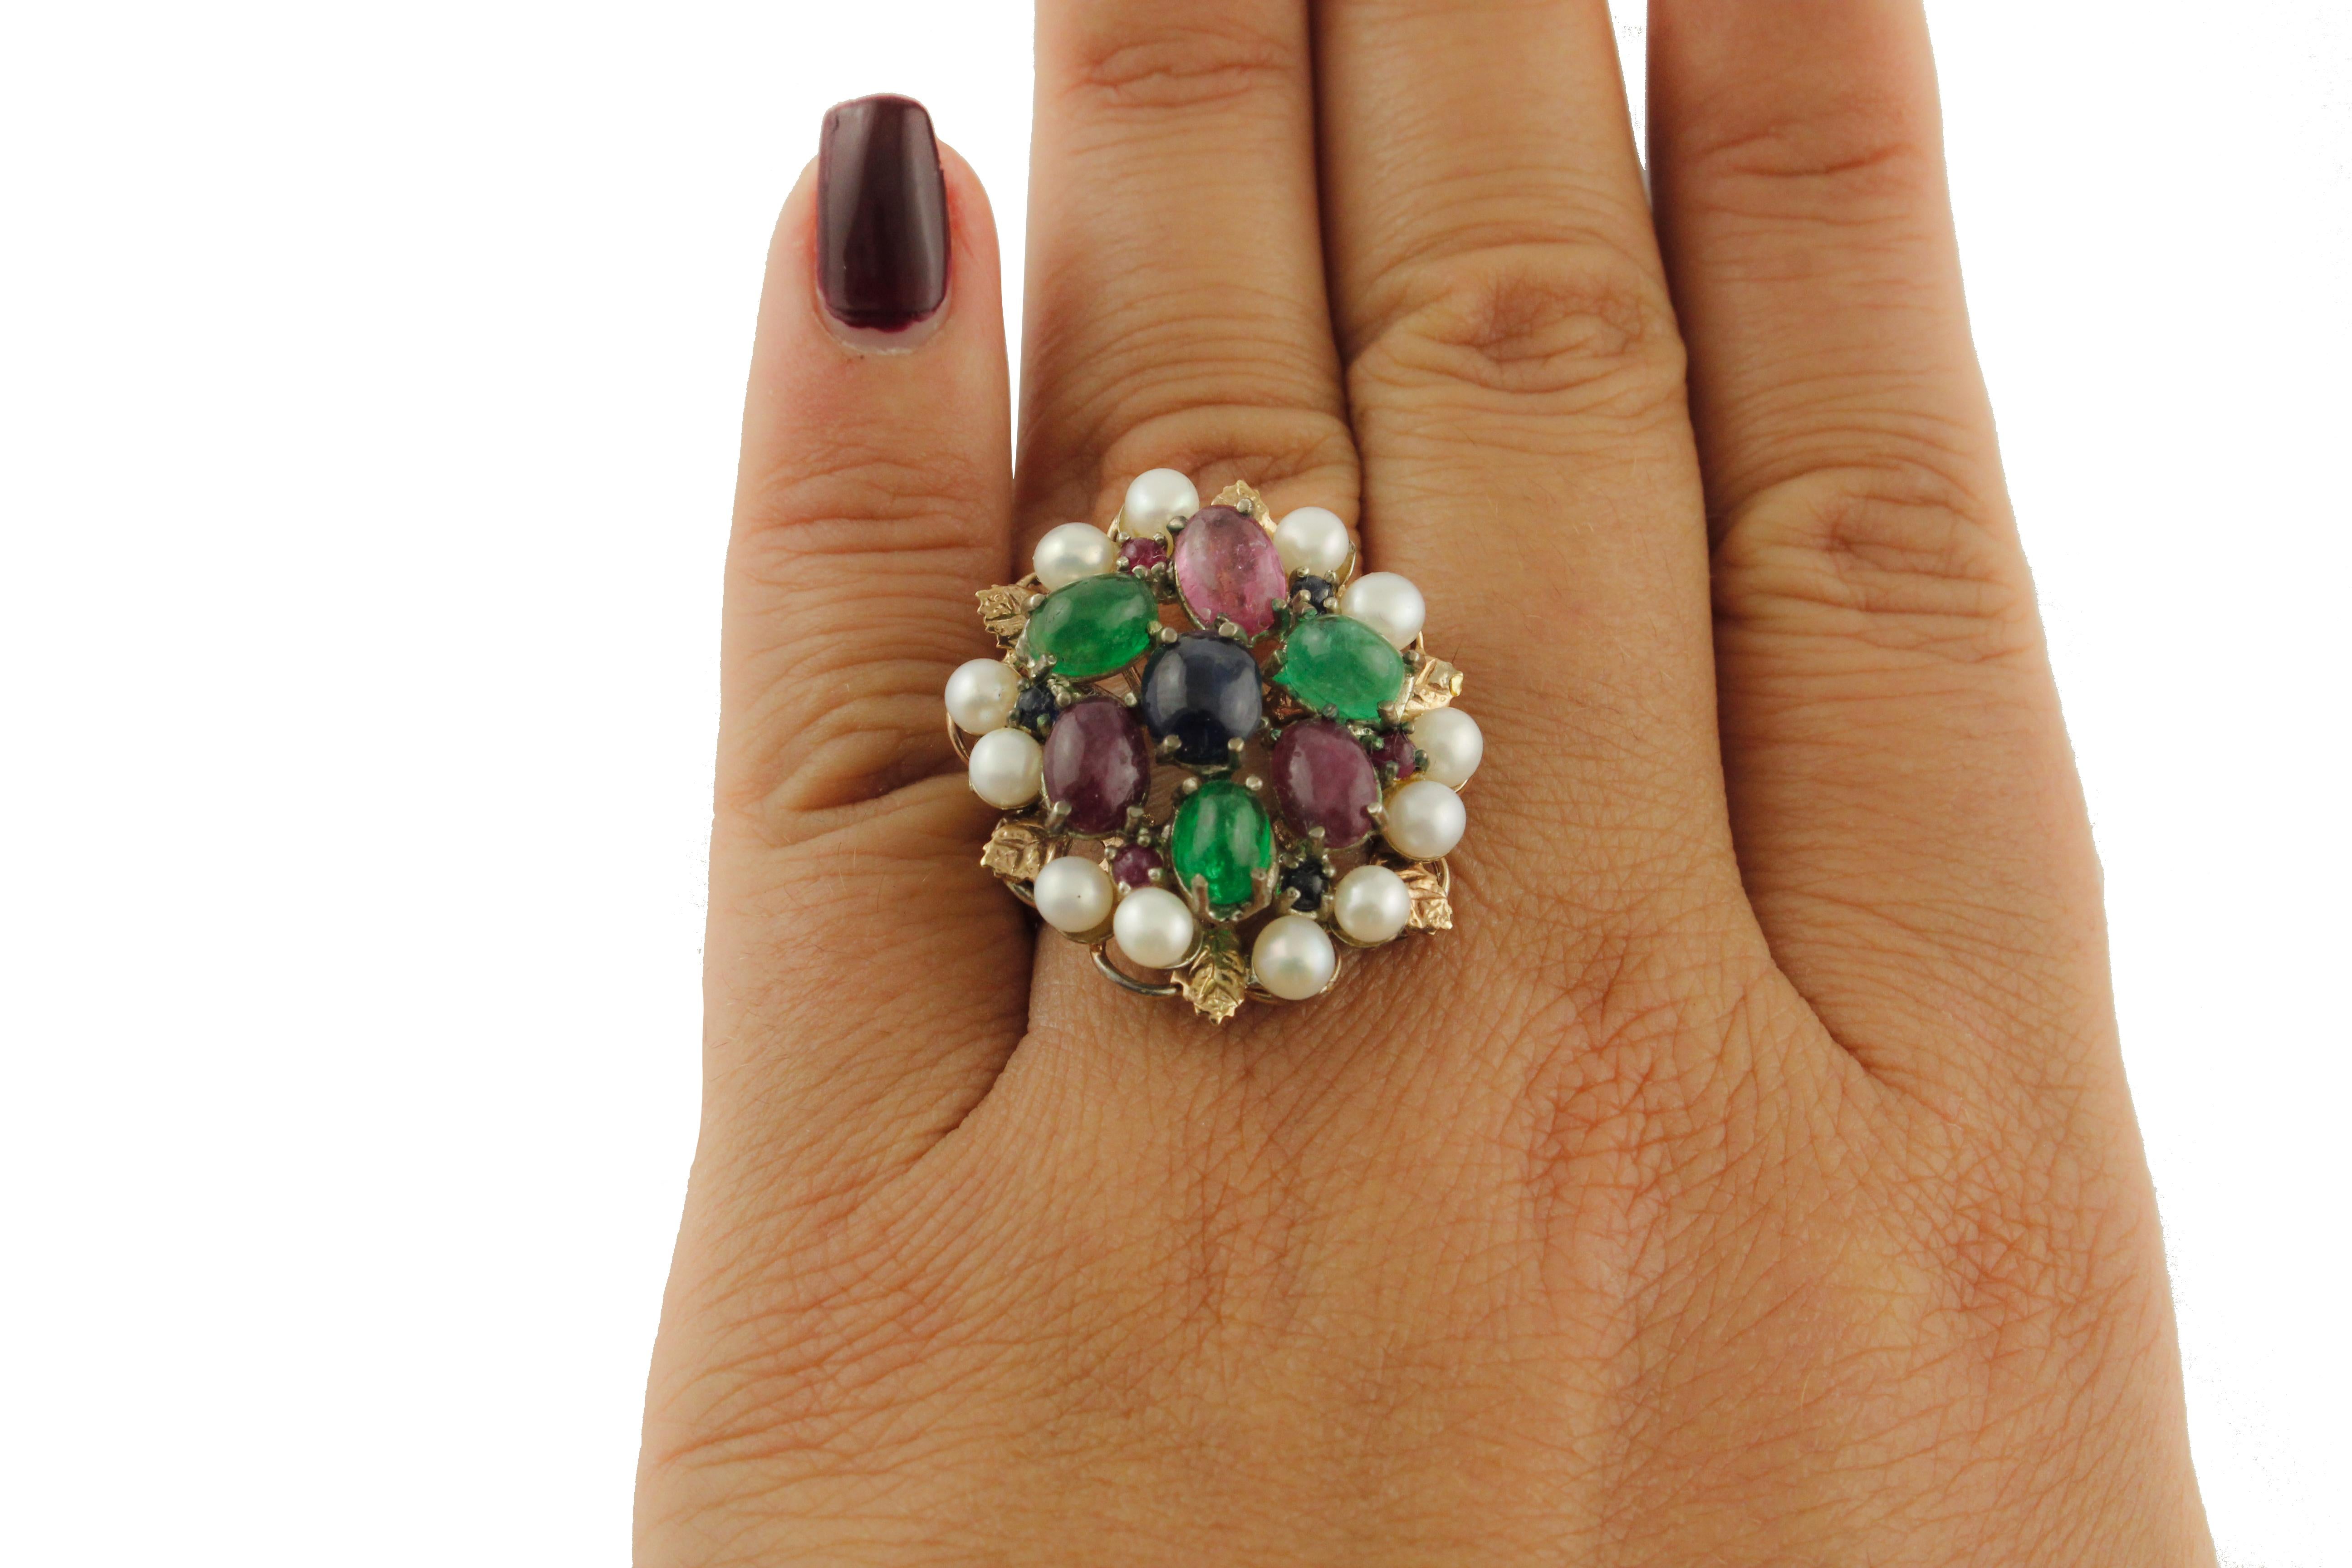 Mixed Cut Blue Sapphires Rubies Emeralds Little Pearls Rose Gold and Silver Fashion Ring